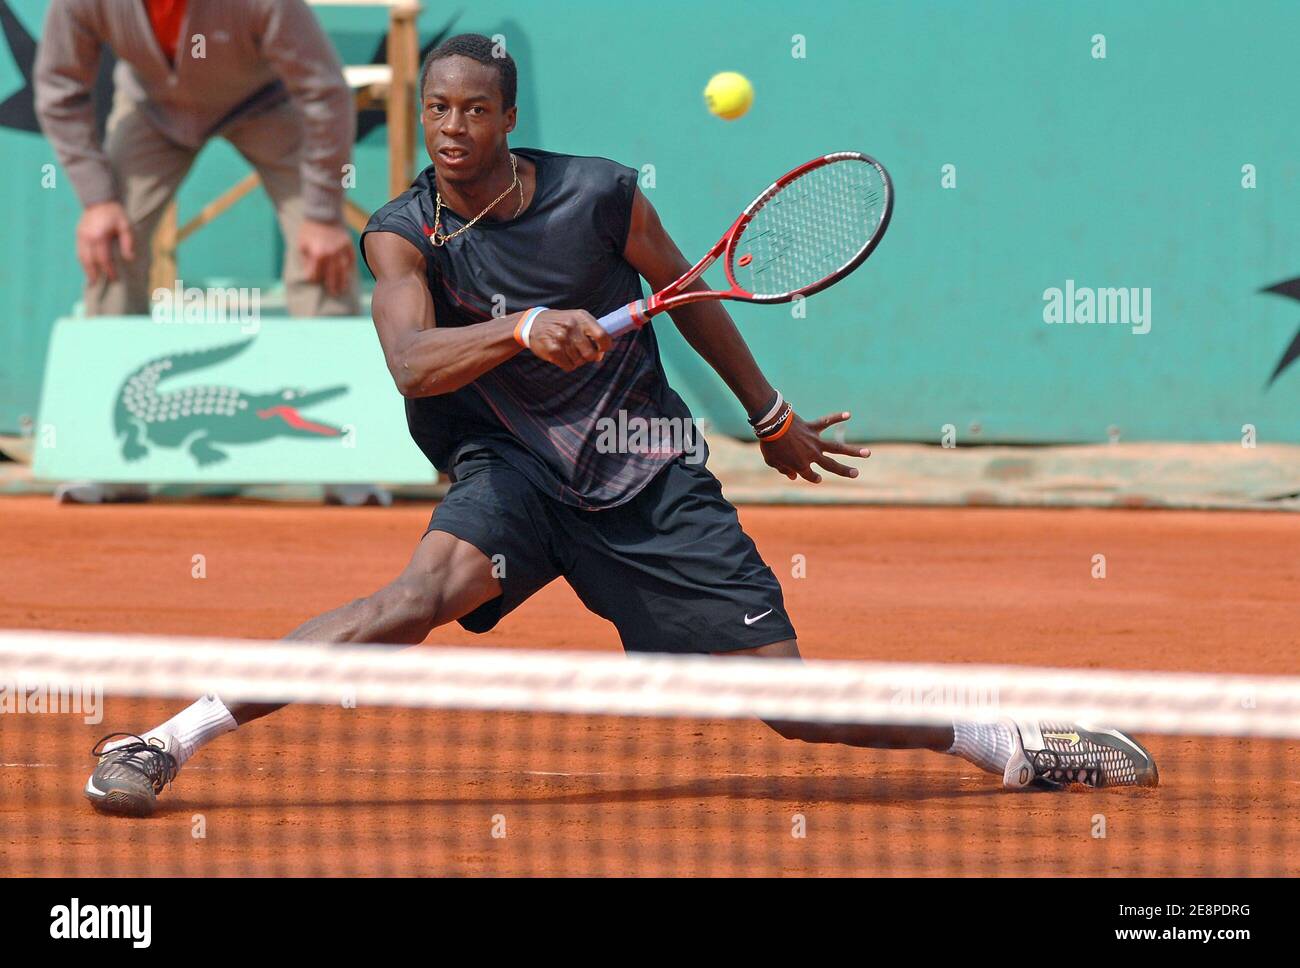 France's Gael Monfils during the French Tennis Open at Roland Garros arena  in Paris, France on May, 2005. Photo by Corinne  Dubreuil/Cameleon/ABACAPRESS.COM Stock Photo - Alamy